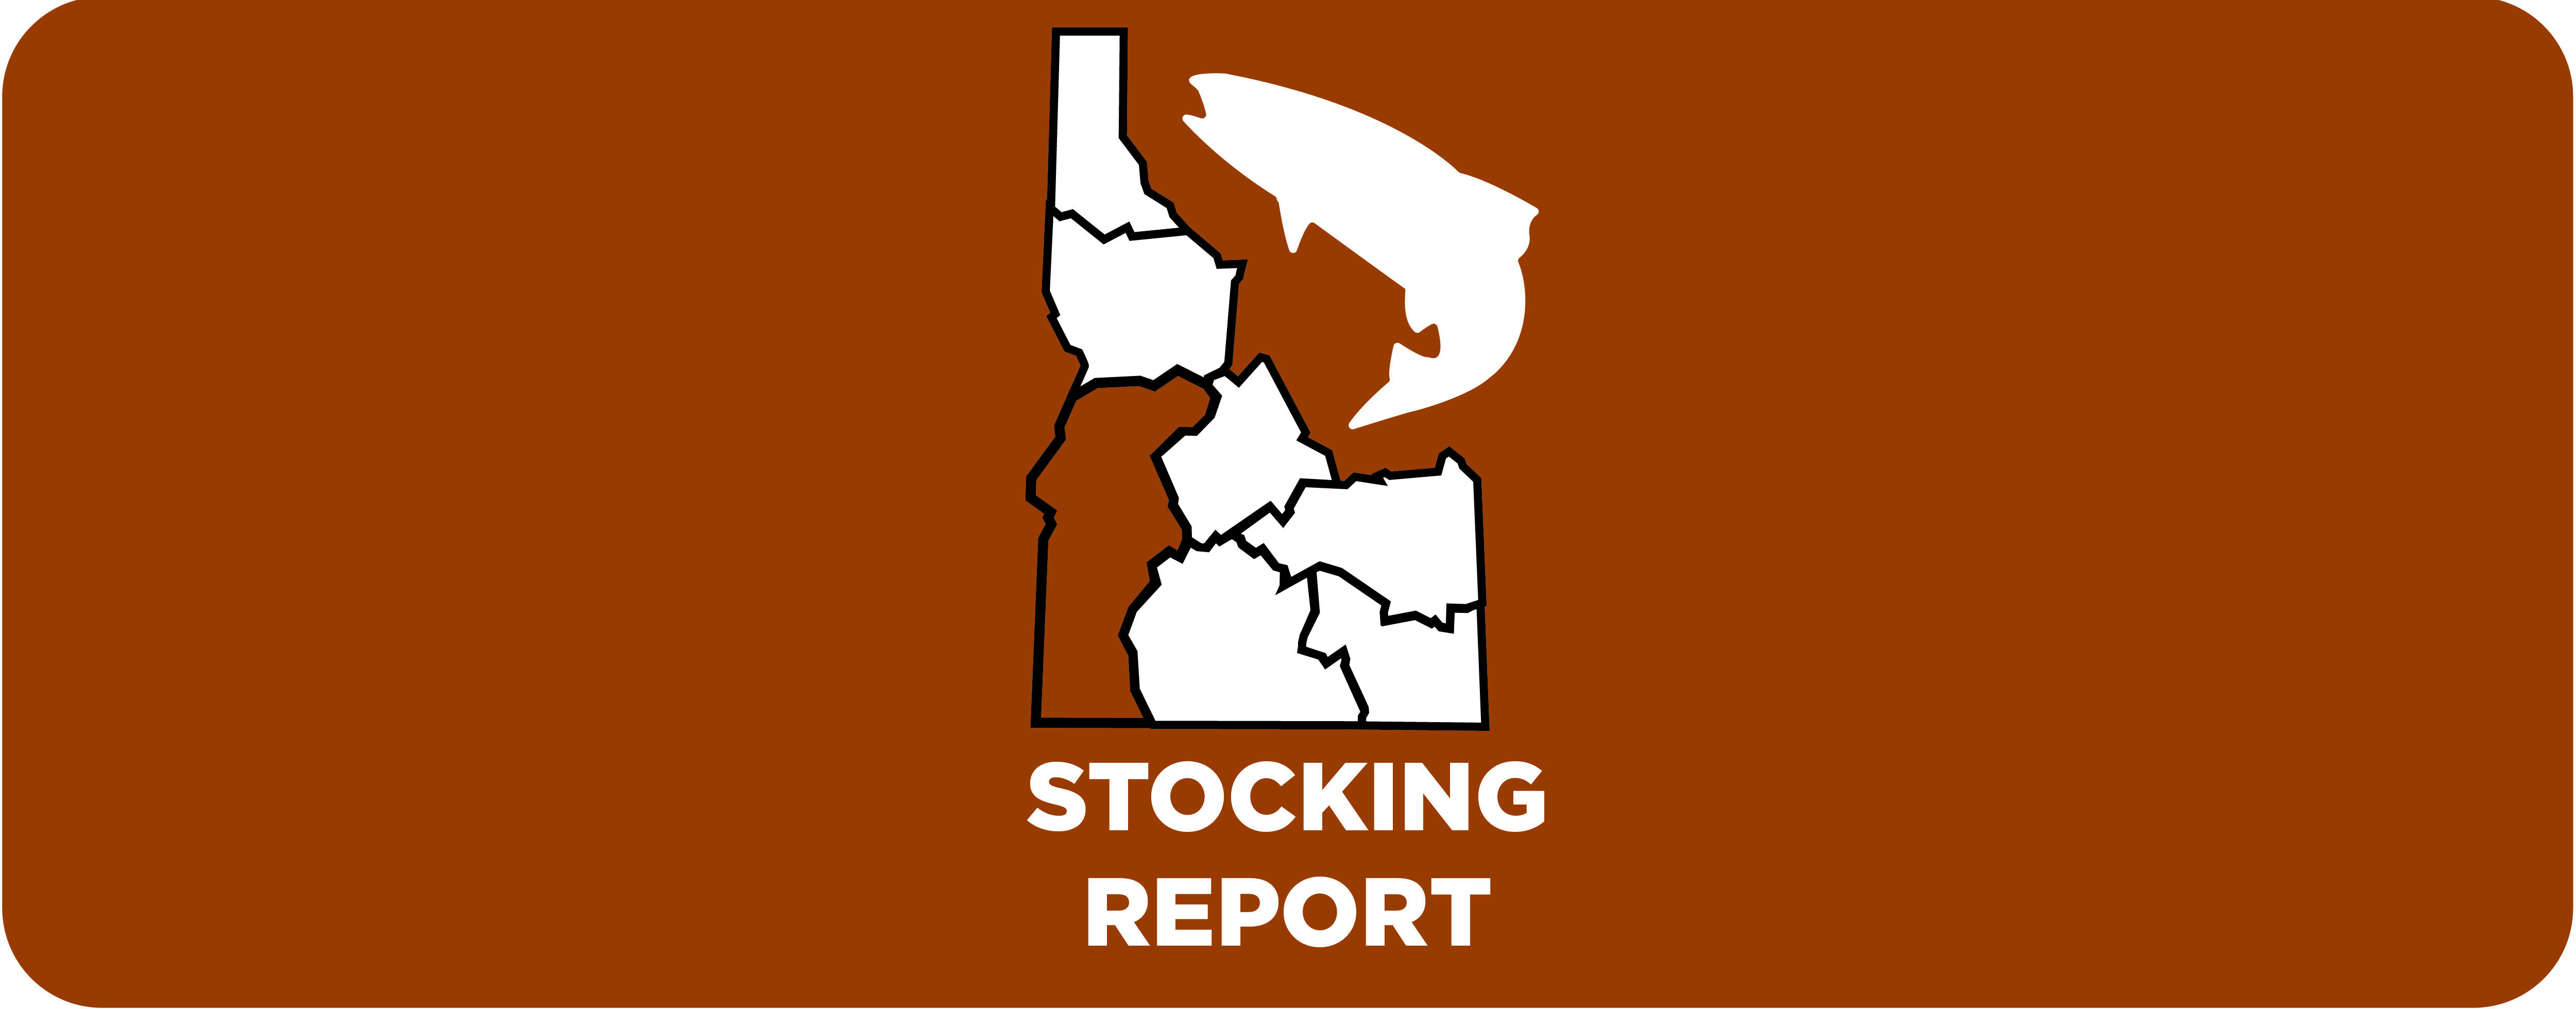 A stocking report logo for the Southwest Region.